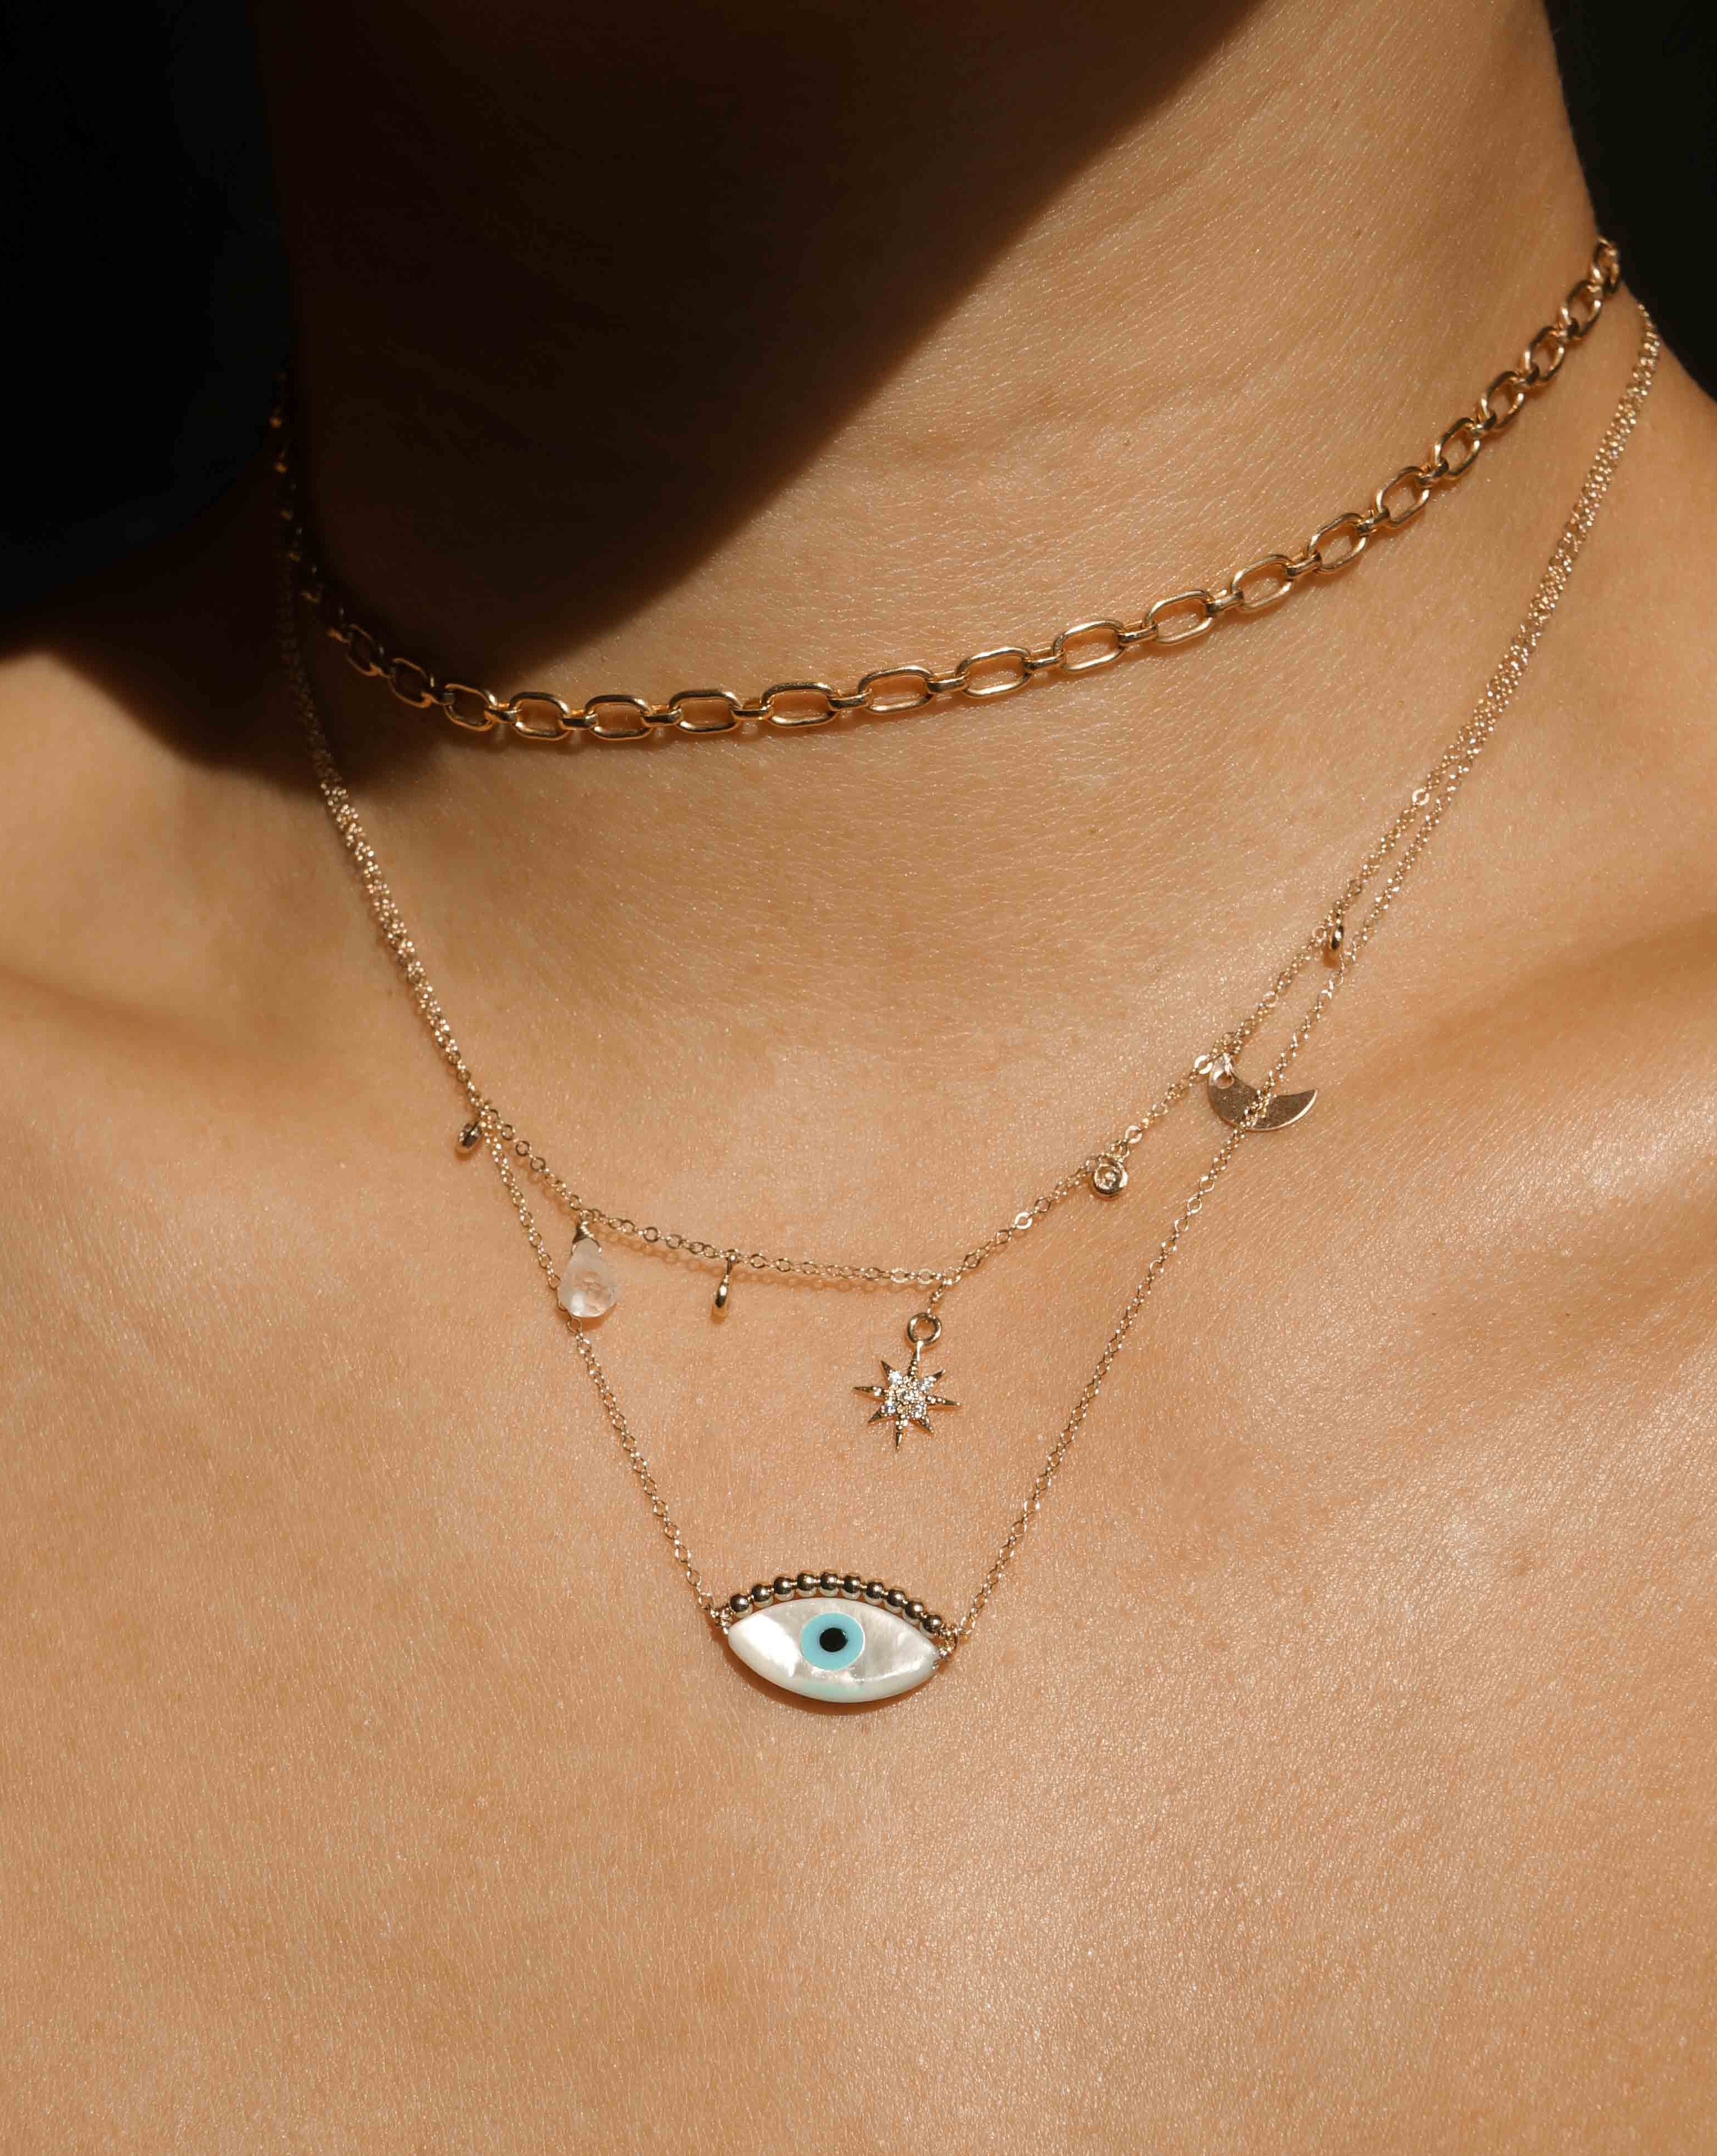 Ira Necklace by KOZAKH. A 16 to 18 inch adjustable length necklace in 14K Gold Filled, featuring a hand carved Mother of Pearl Evil Eye charm and 2mm Seamless gold beads.